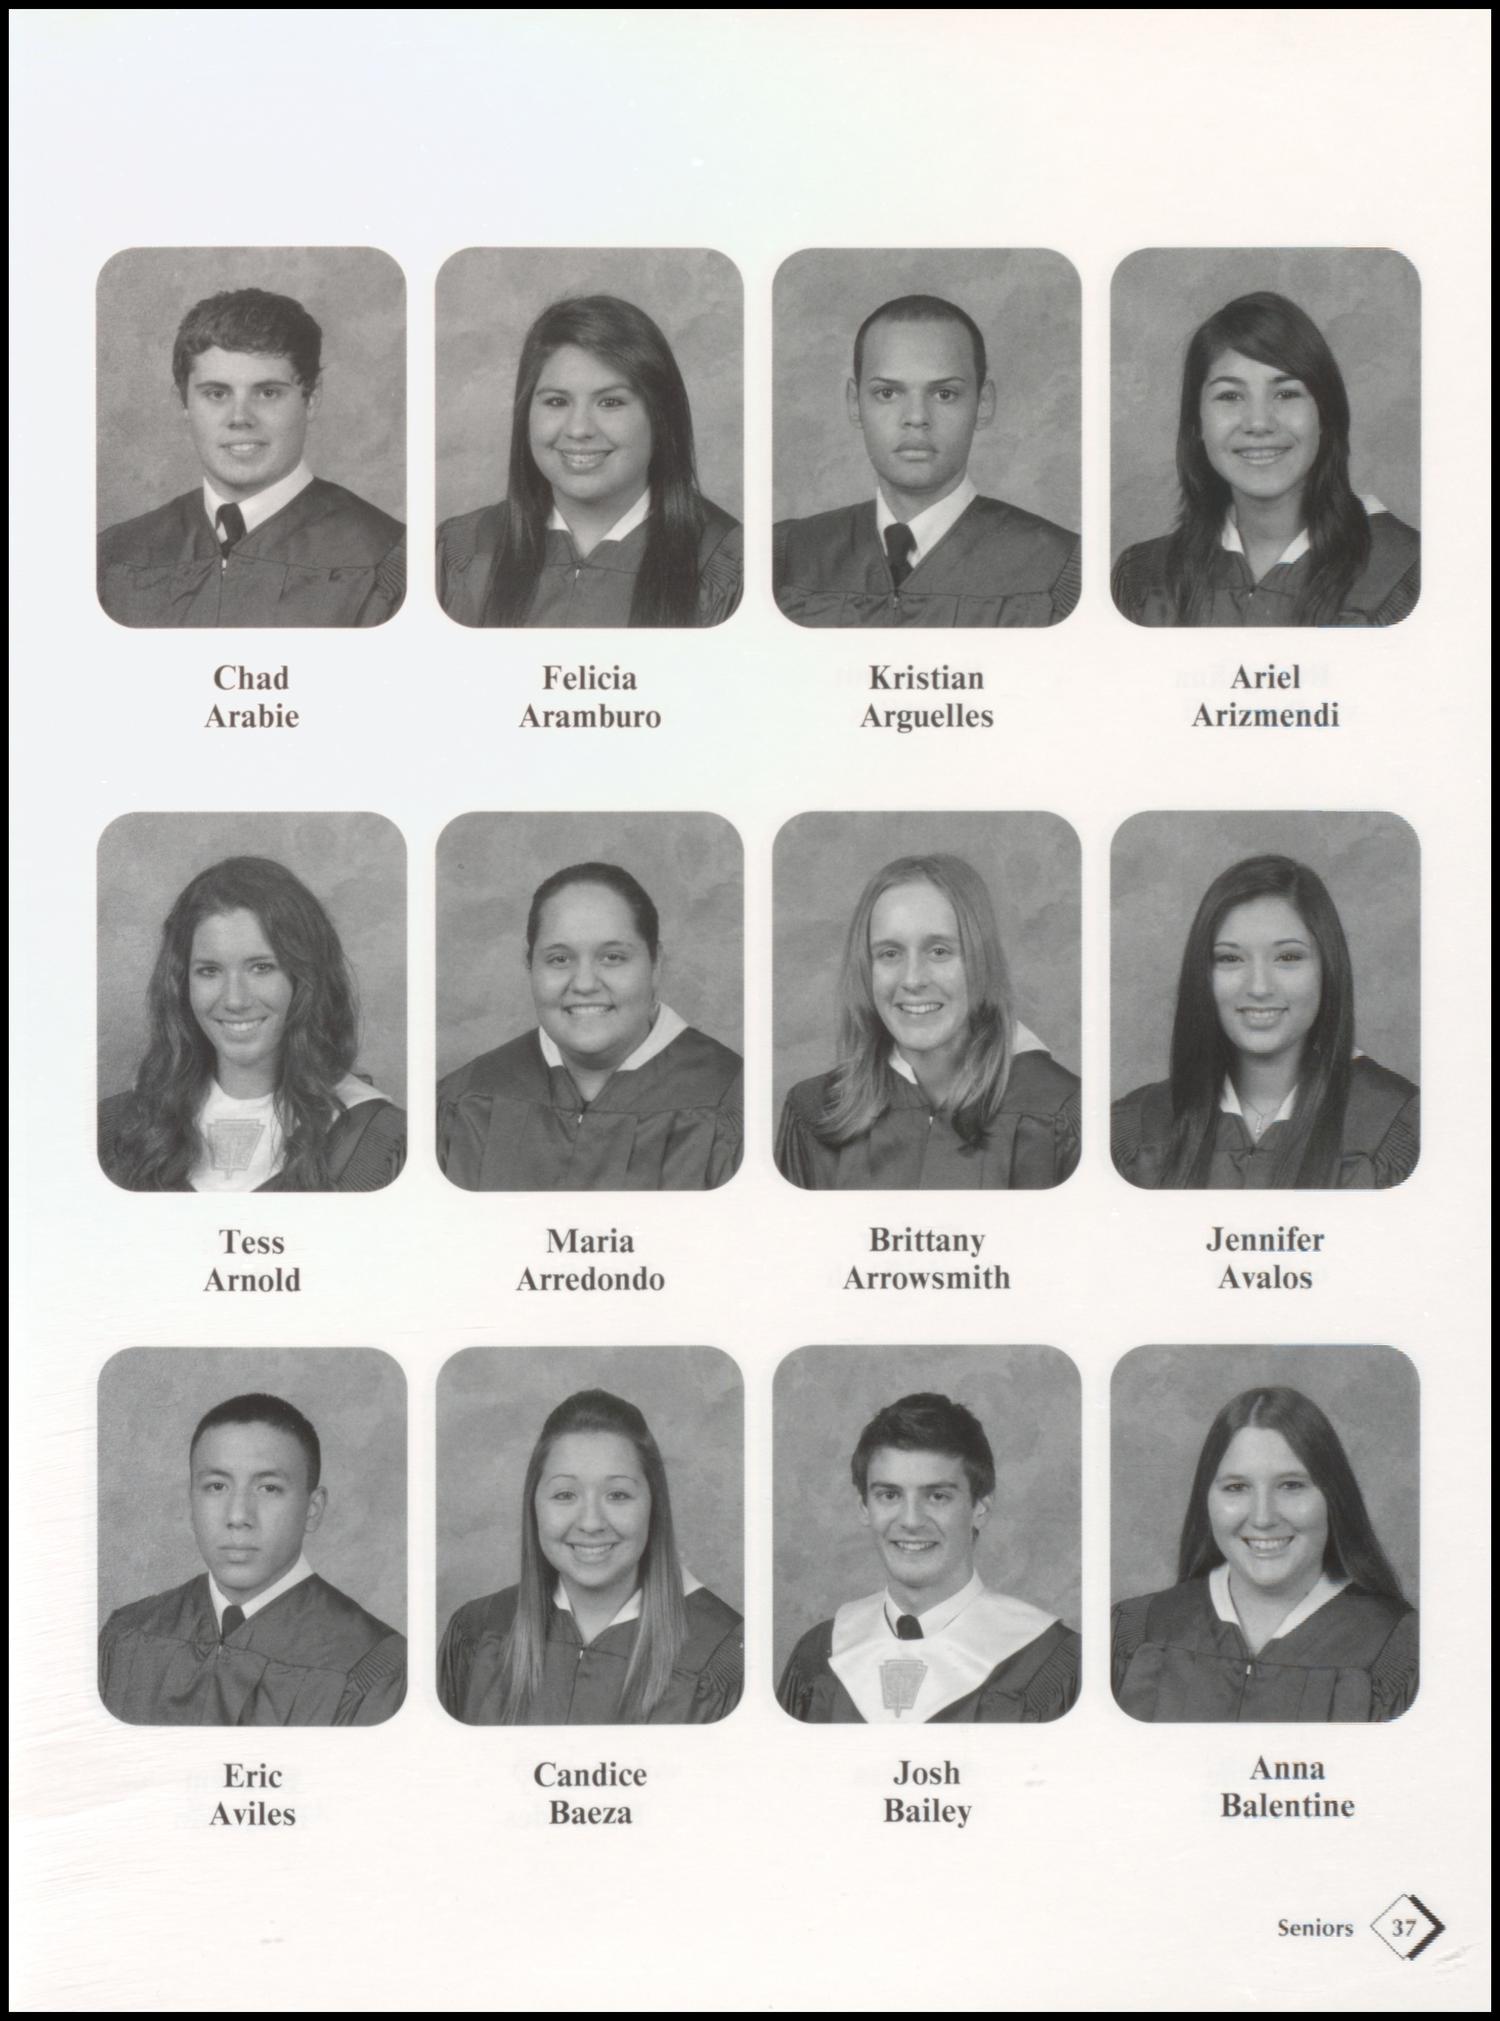 The Governor, Yearbook of Ross S. Sterling High School, 2010
                                                
                                                    37
                                                